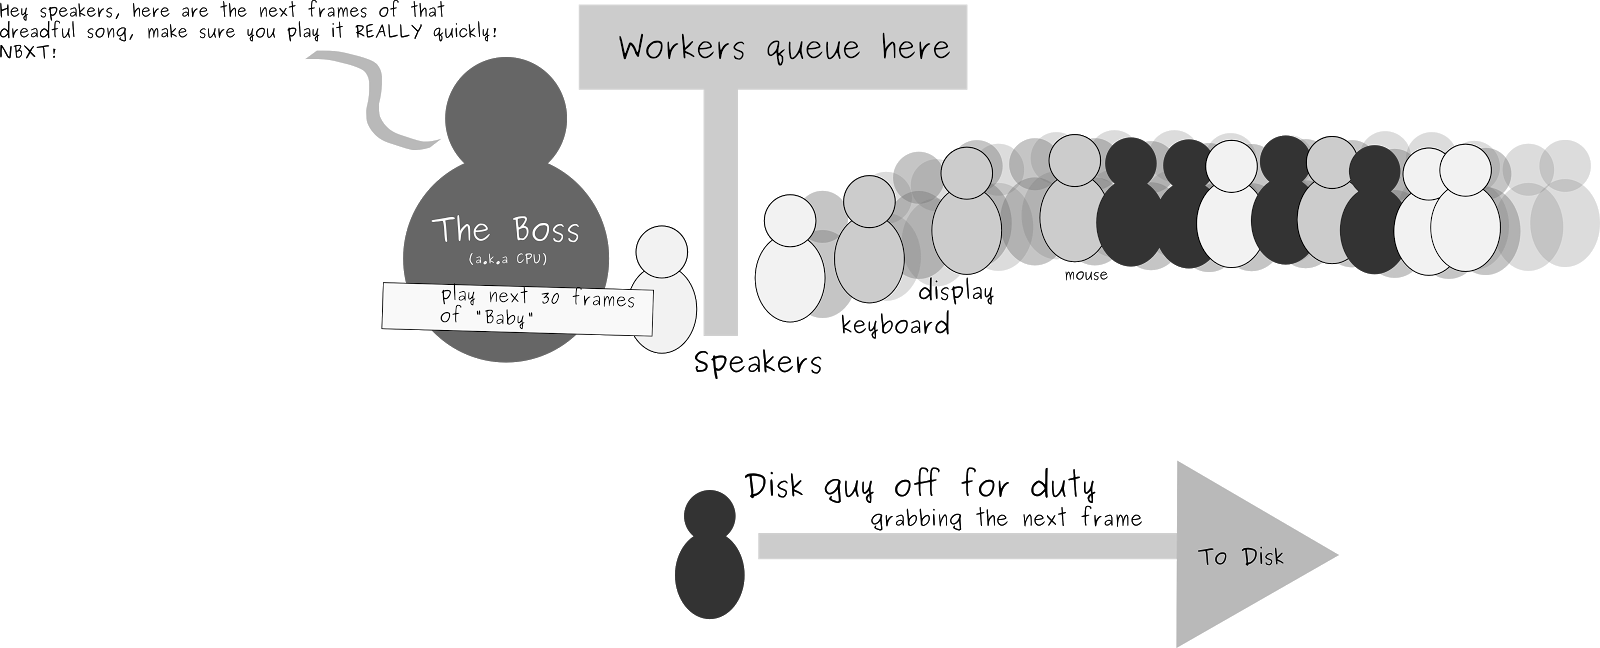 Fast workers queue